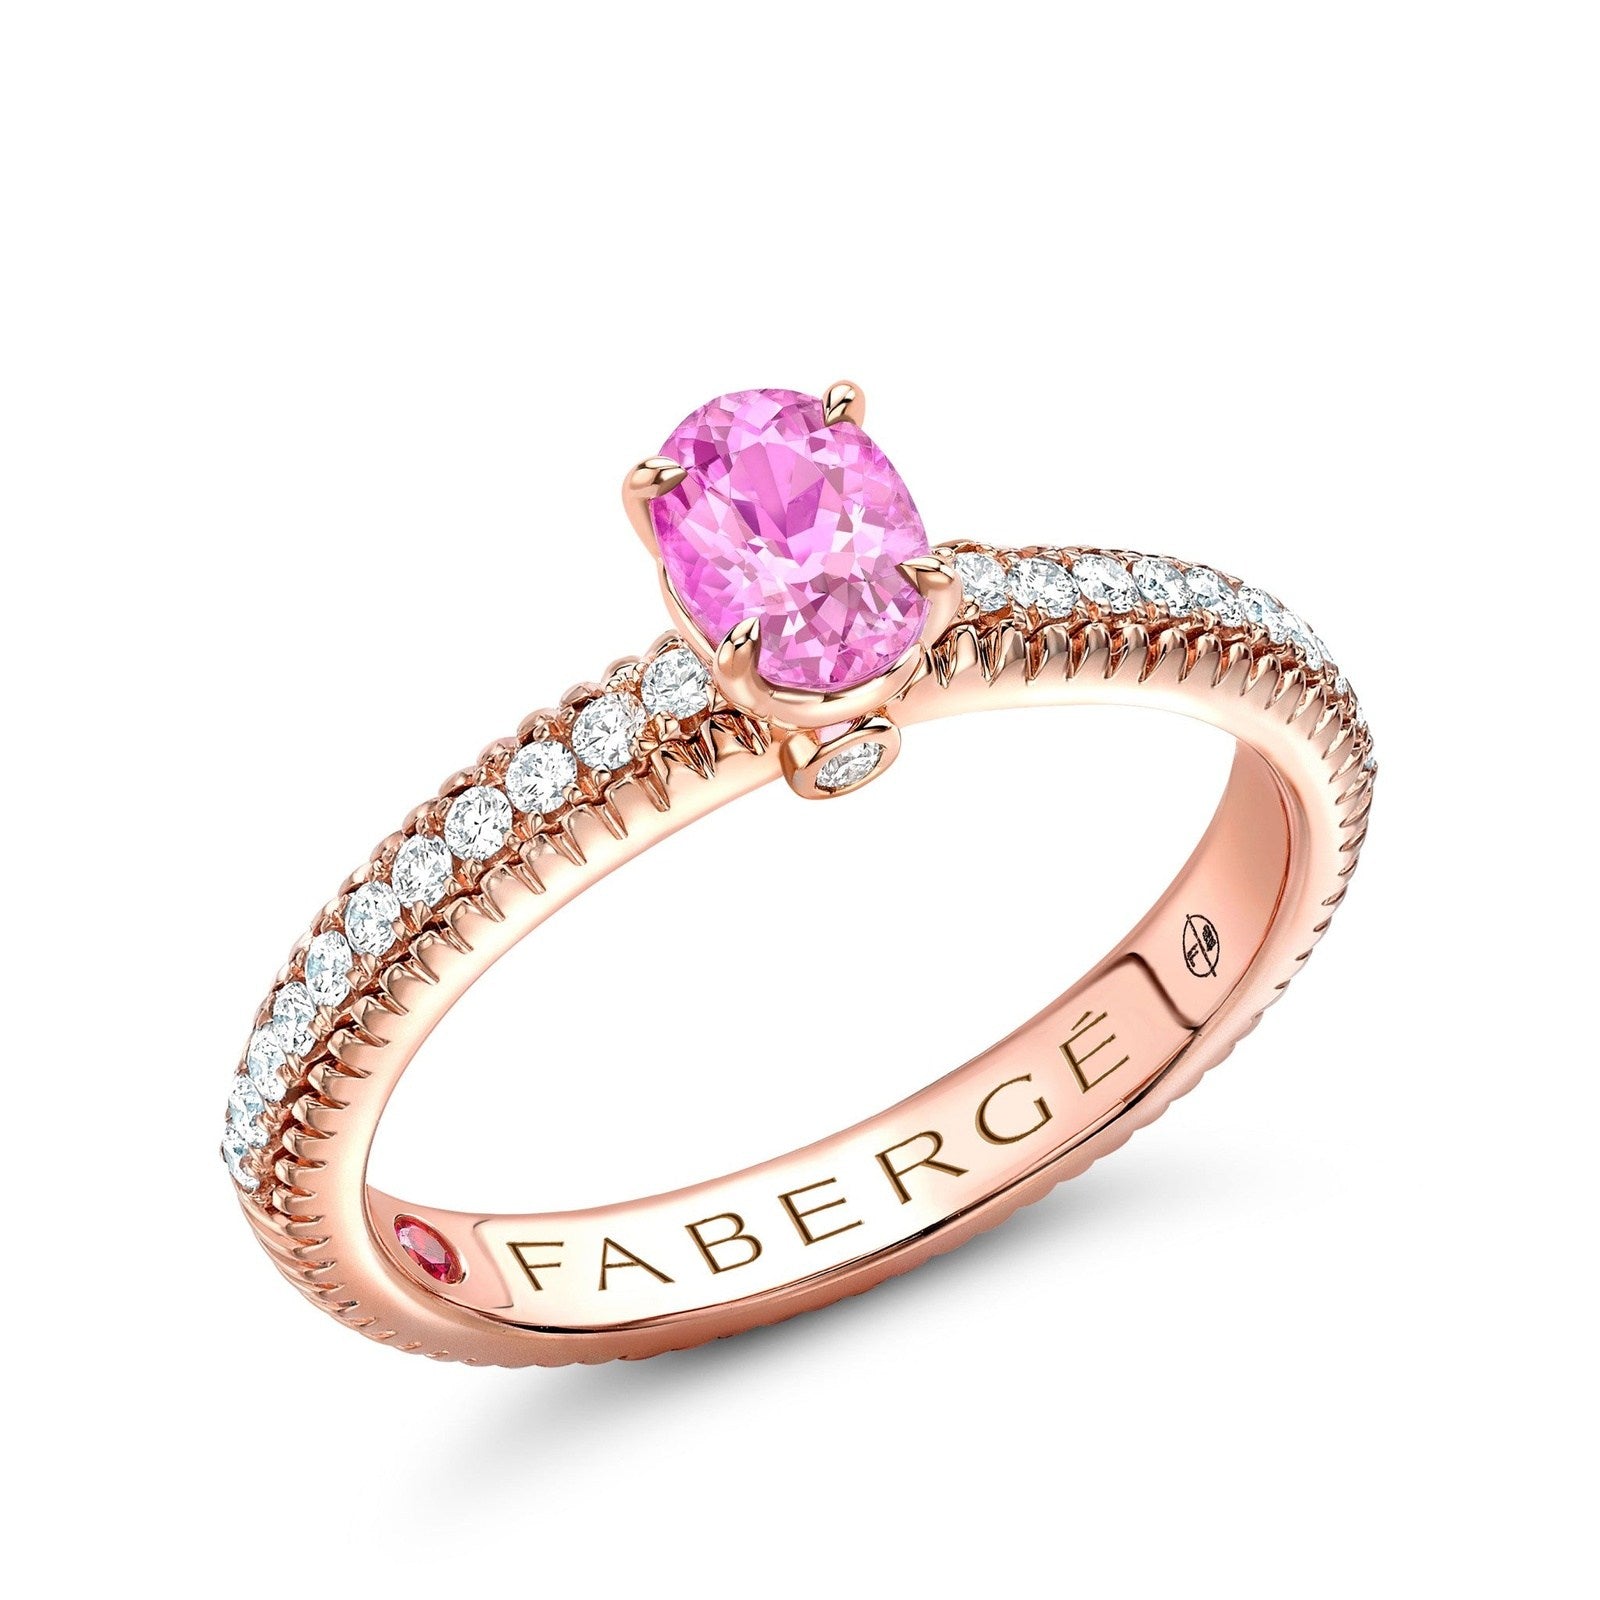 Faberge Colours of Love Rose Gold Pink Sapphire Fluted Ring with Diamond Shoulders - 831RG2742